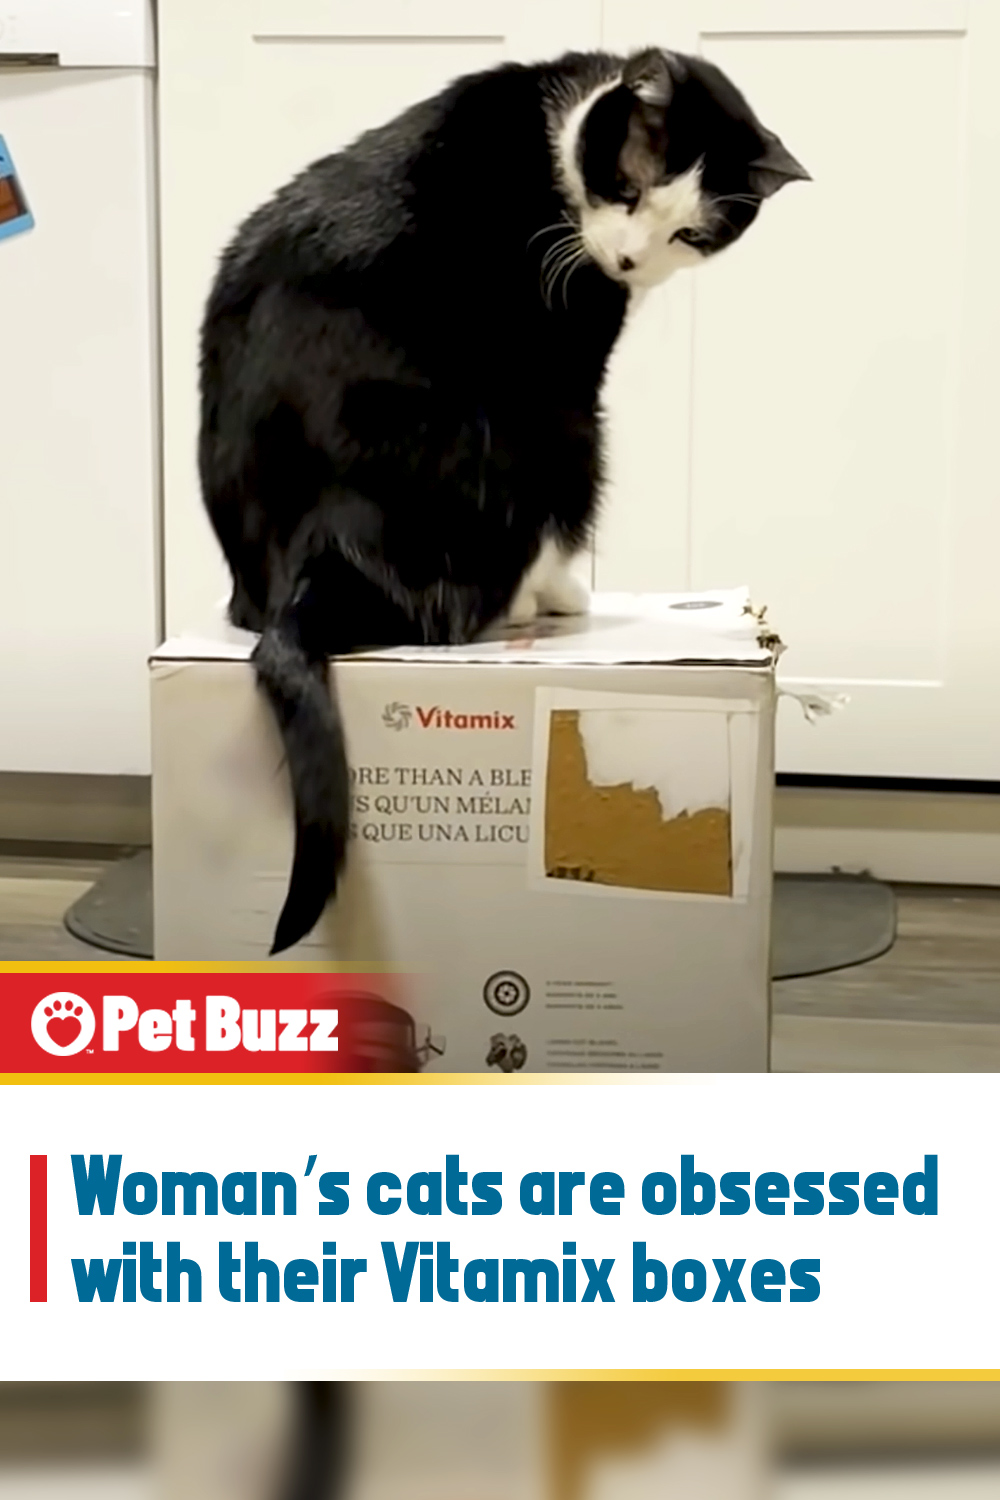 Woman’s cats are obsessed with their Vitamix boxes